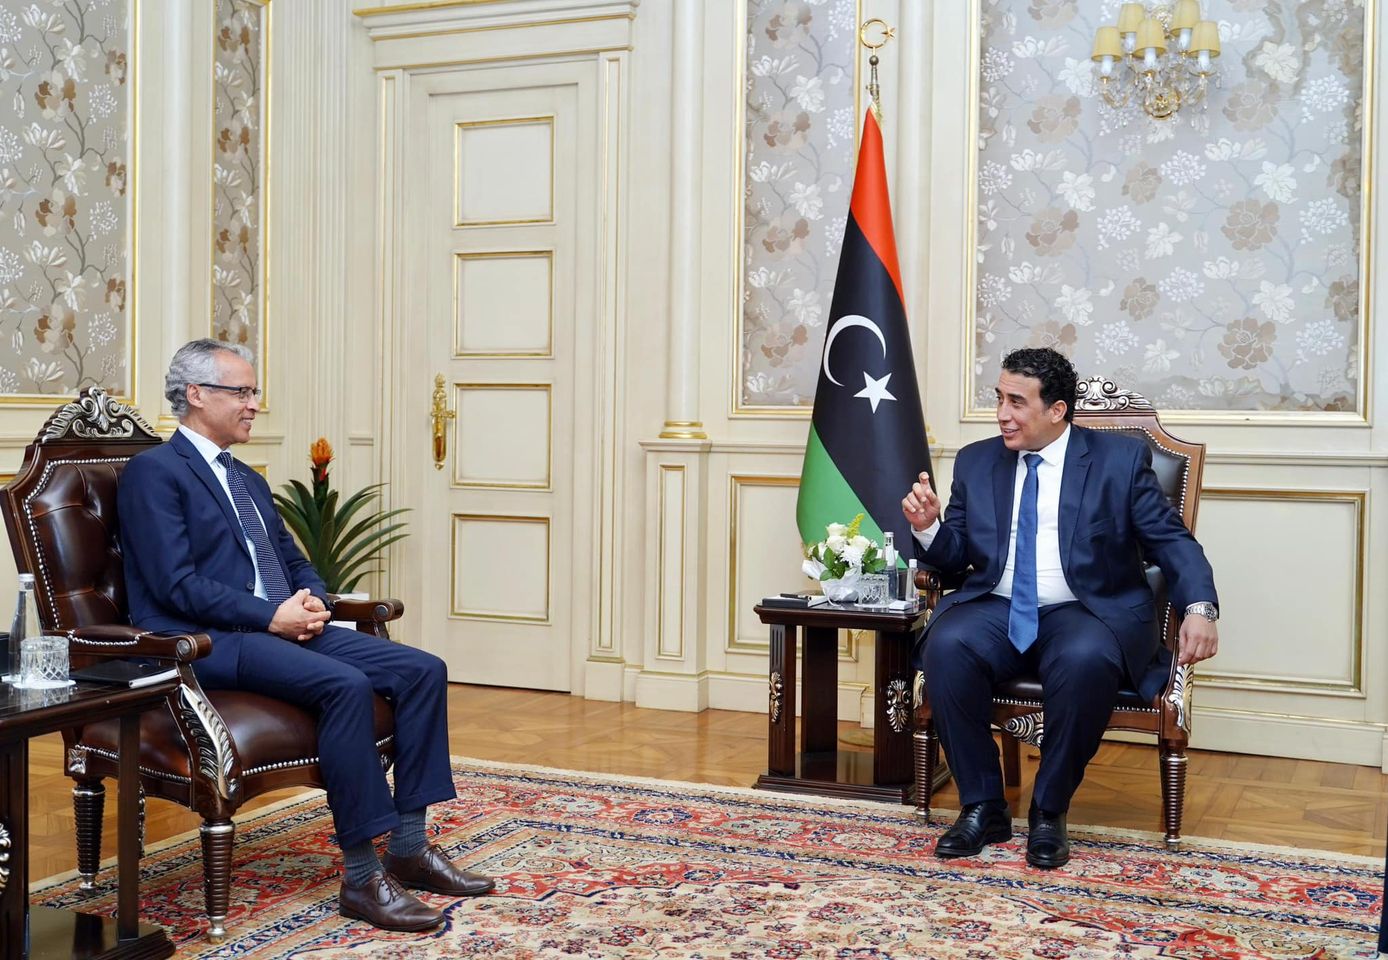 Al-Manfi discusses with the French ambassador the political developments in Libya and files of interest to both countries.